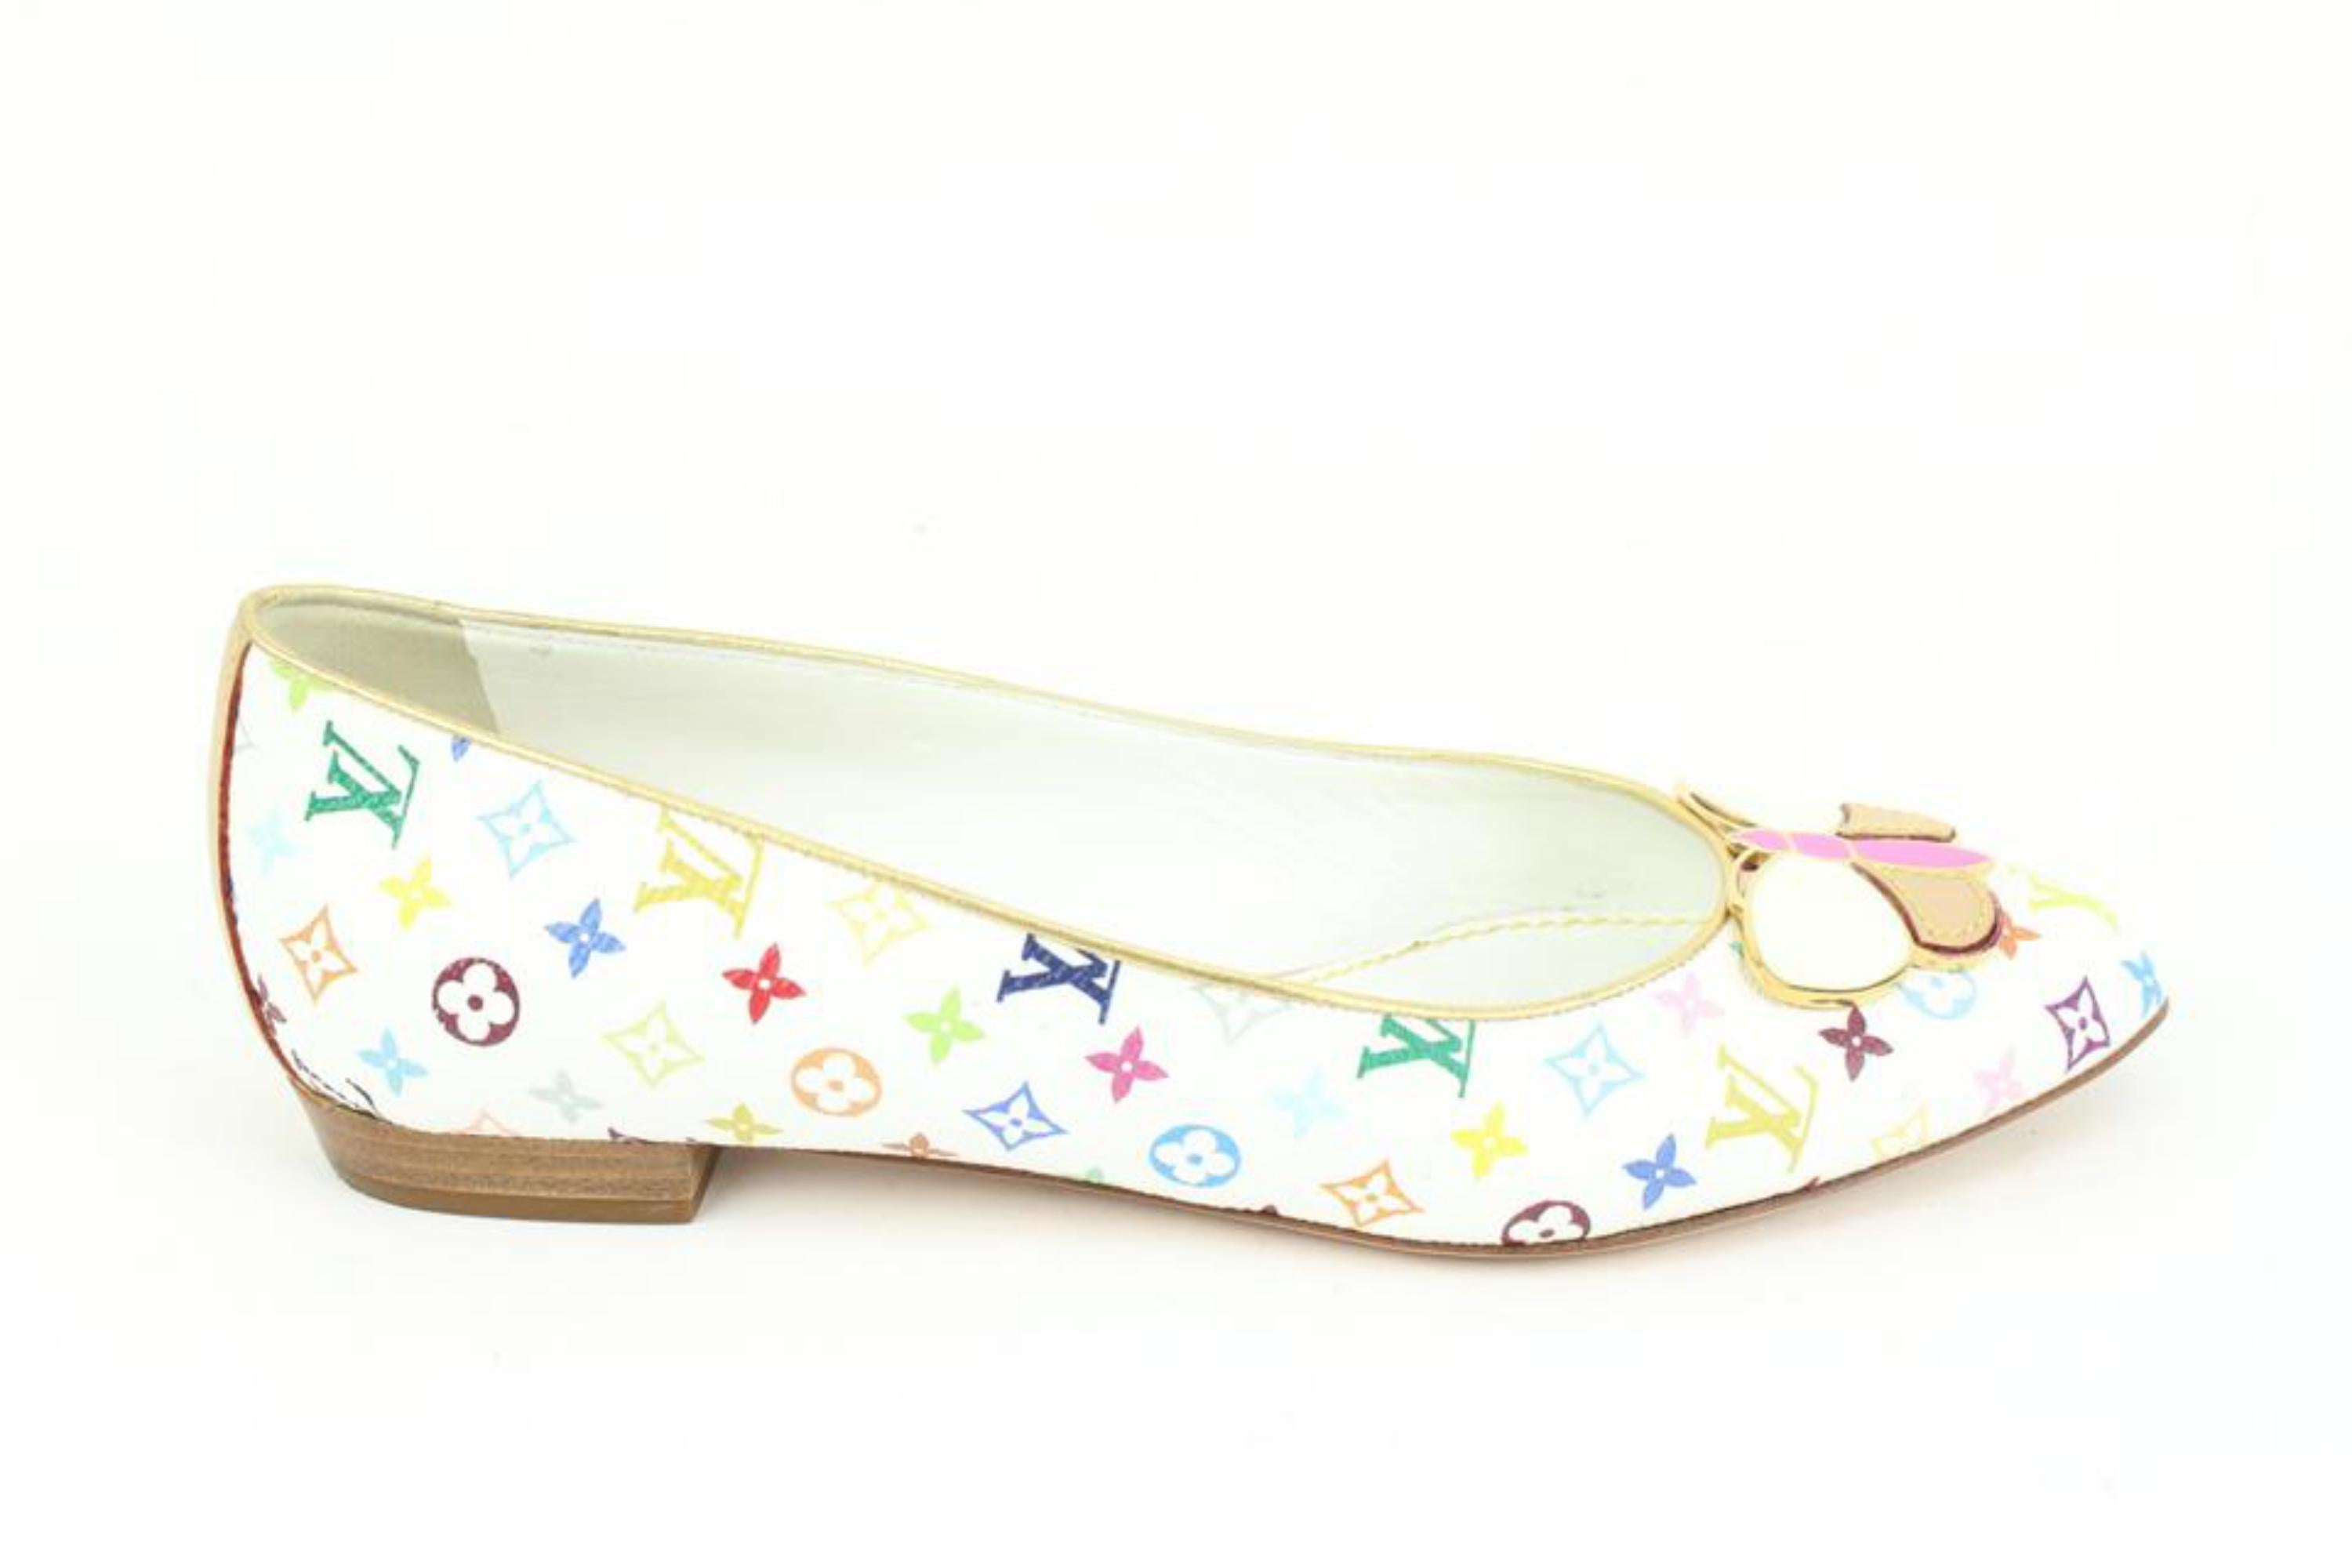 Louis Vuitton Size 34.5 White Multicolor Butterfly Ballerina Flats 46LK34
Date Code/Serial Number: DD 0048
Made In: Italy
Measurements: Length:  9.4